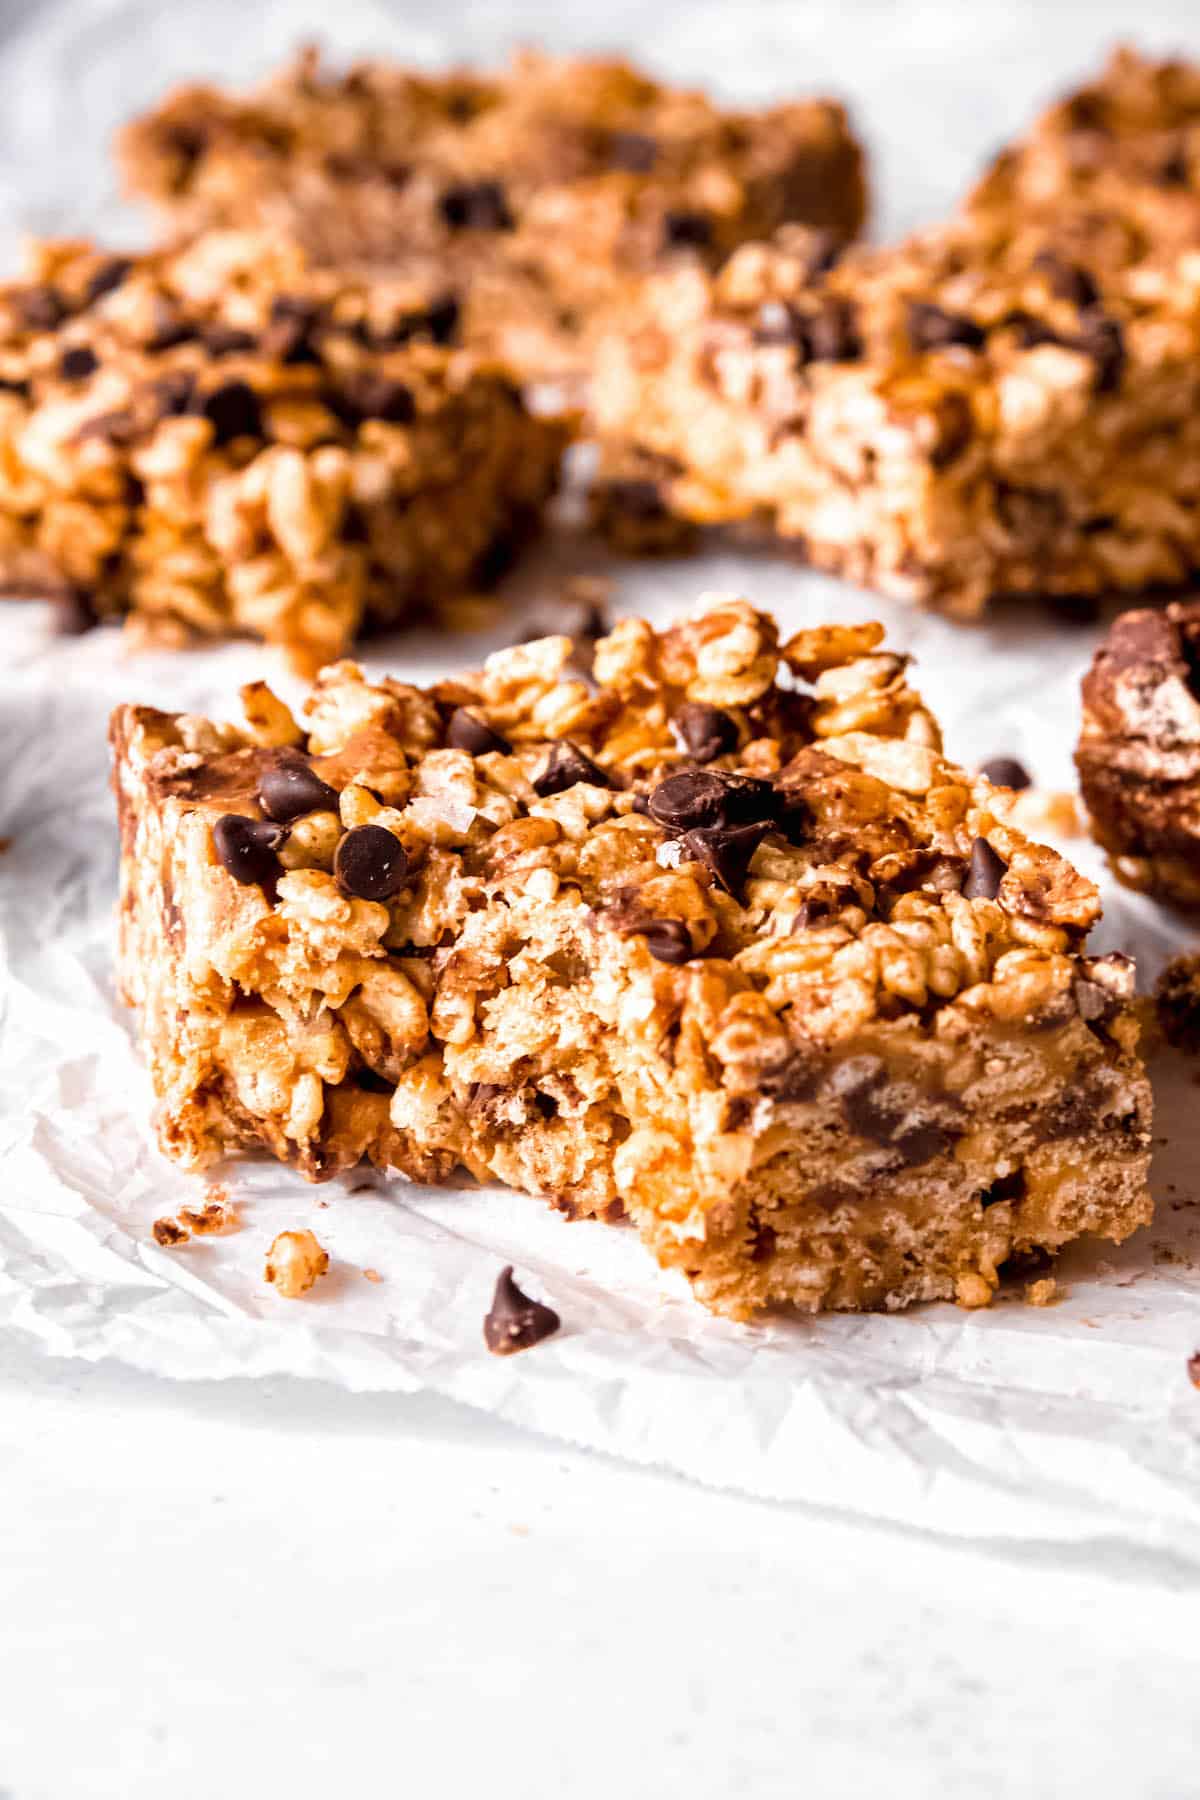 chocolate peanut butter rice krispies treats on parchment with the nearest one having a bite taken out.